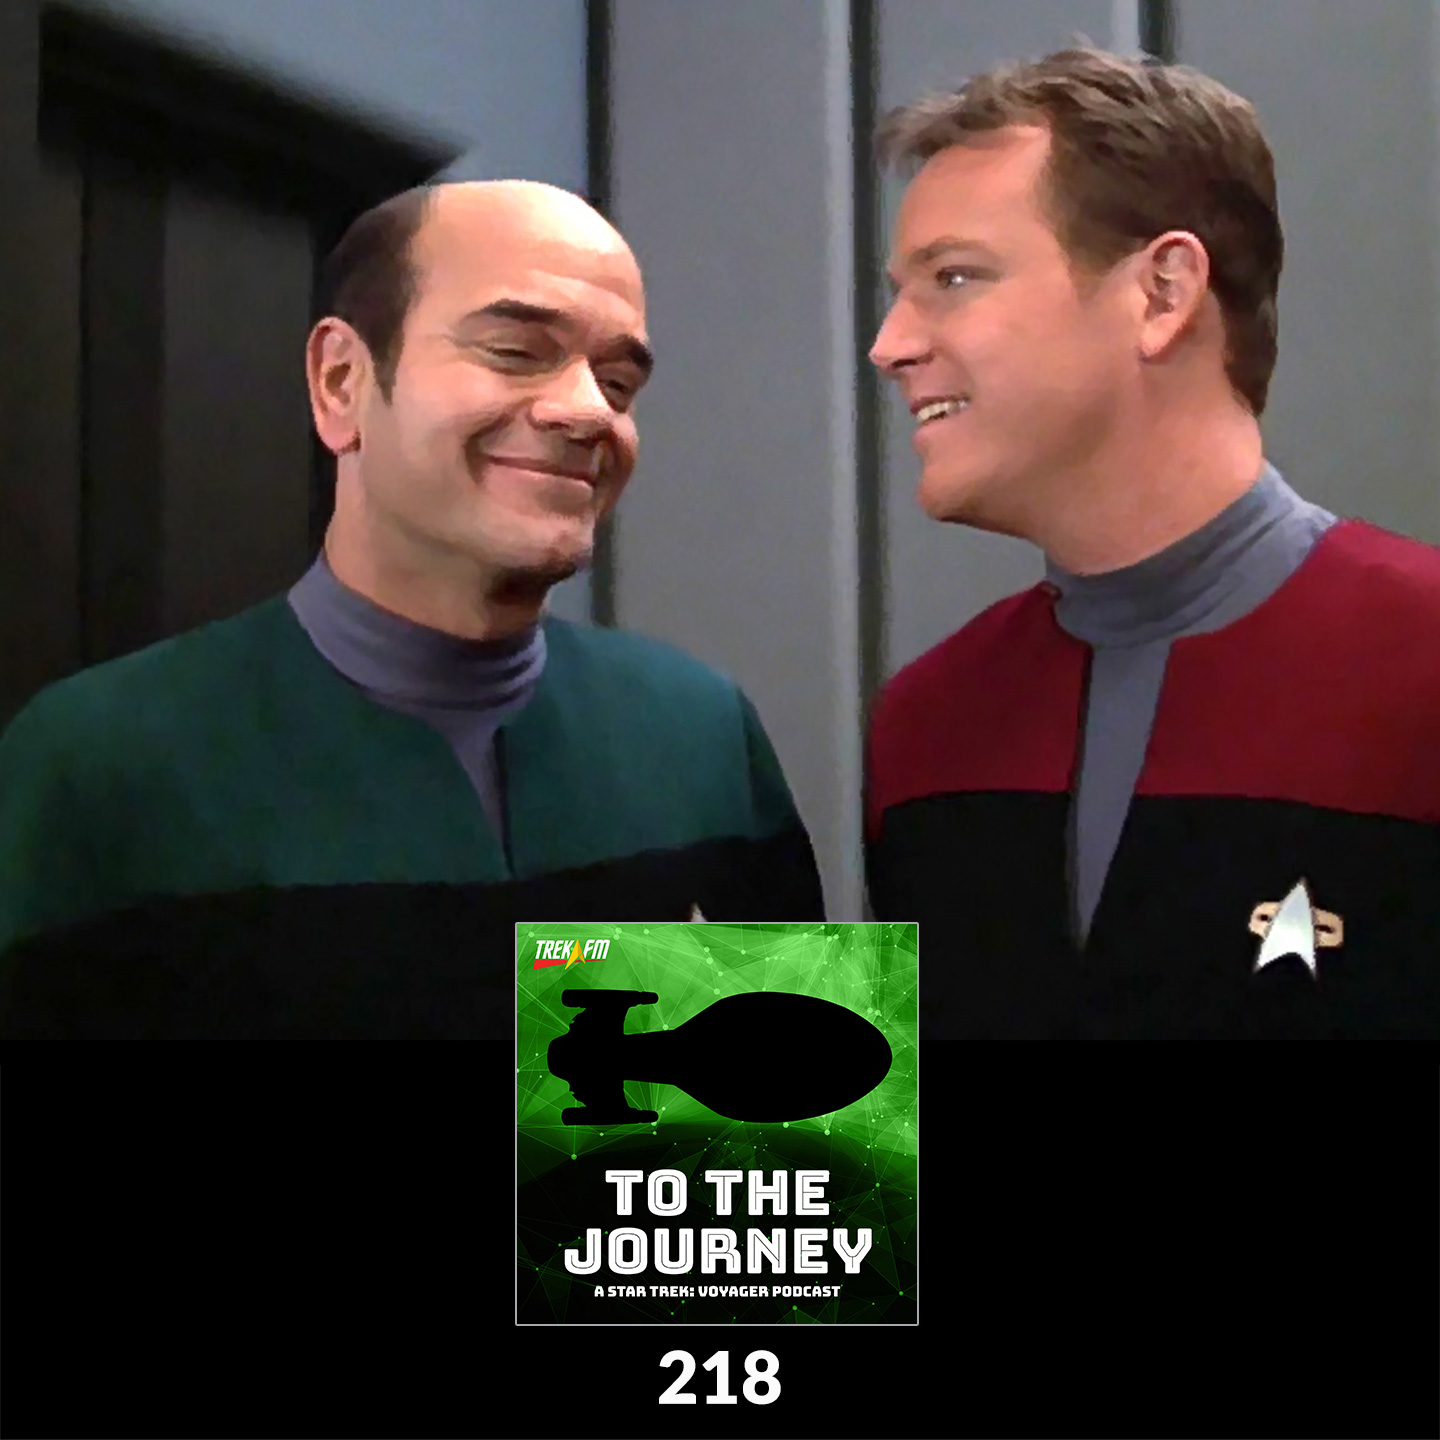 To The Journey 218: One Hand on the Joystick - Favorite Tom Paris / EMH Moments.